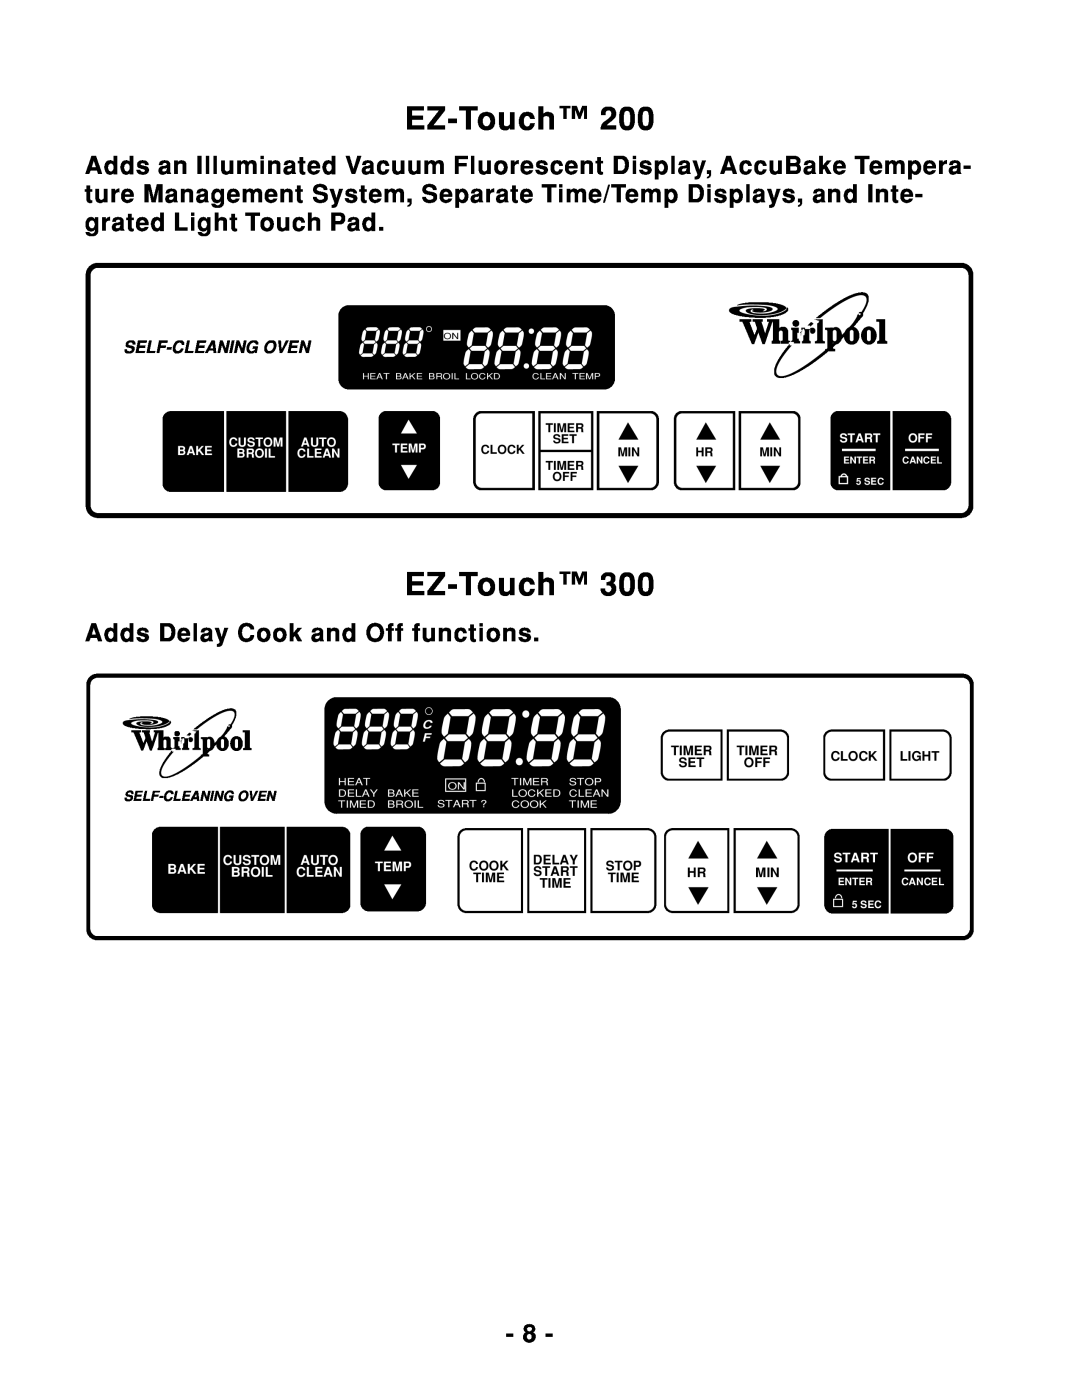 Whirlpool 465 888 F, EZ-Touch, Self-Cleaning Oven, Timer, Clock Light, Bake, Custom, Auto, Temp, Cook, Broil, Stop, Start 